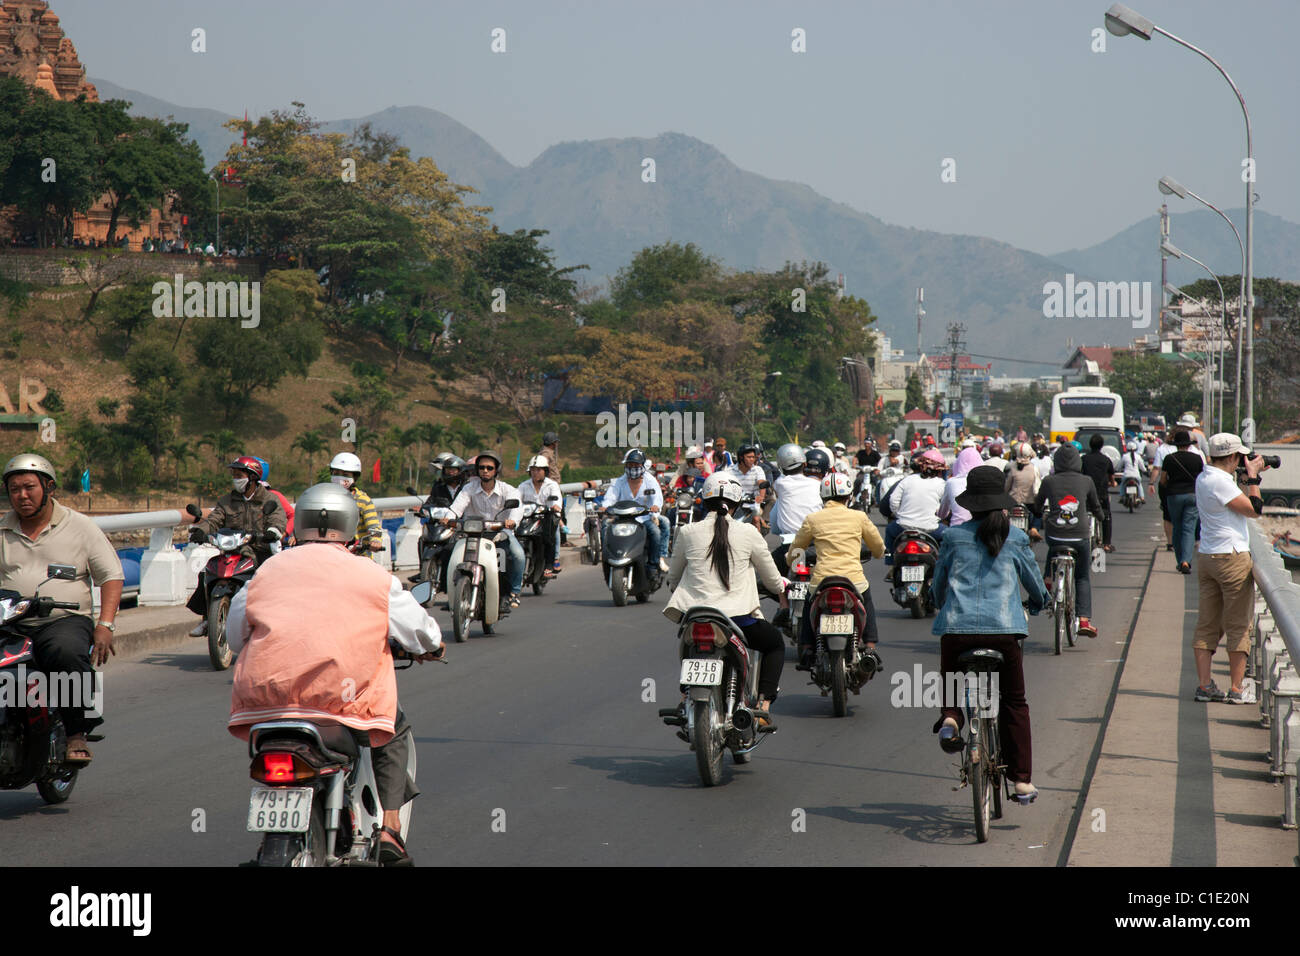 Motorcycle and Bicycle Traffic in Nha Trang Stock Photo